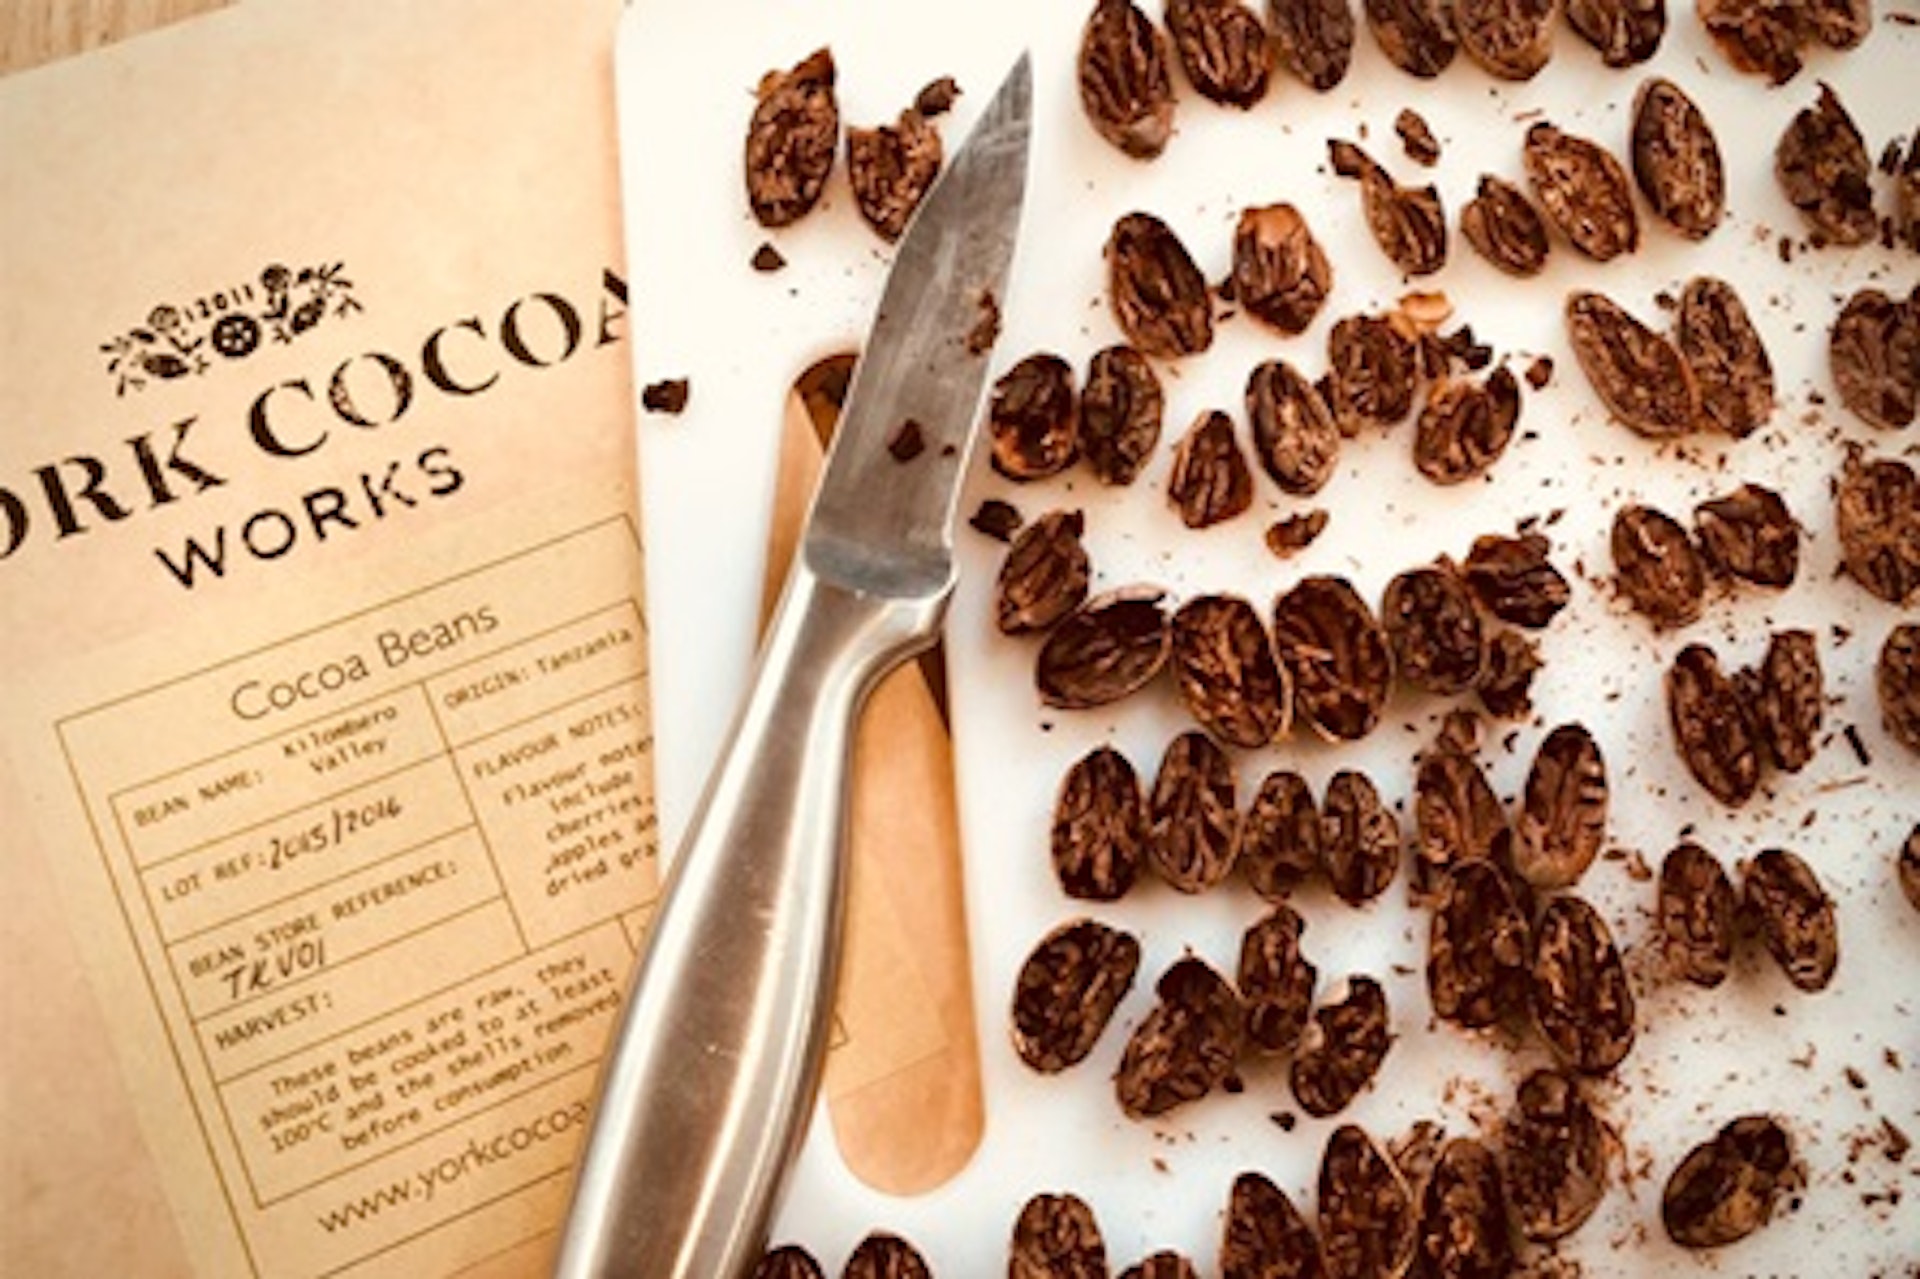 The Ultimate Chocolate Explorers Experience at York Cocoa Works 2